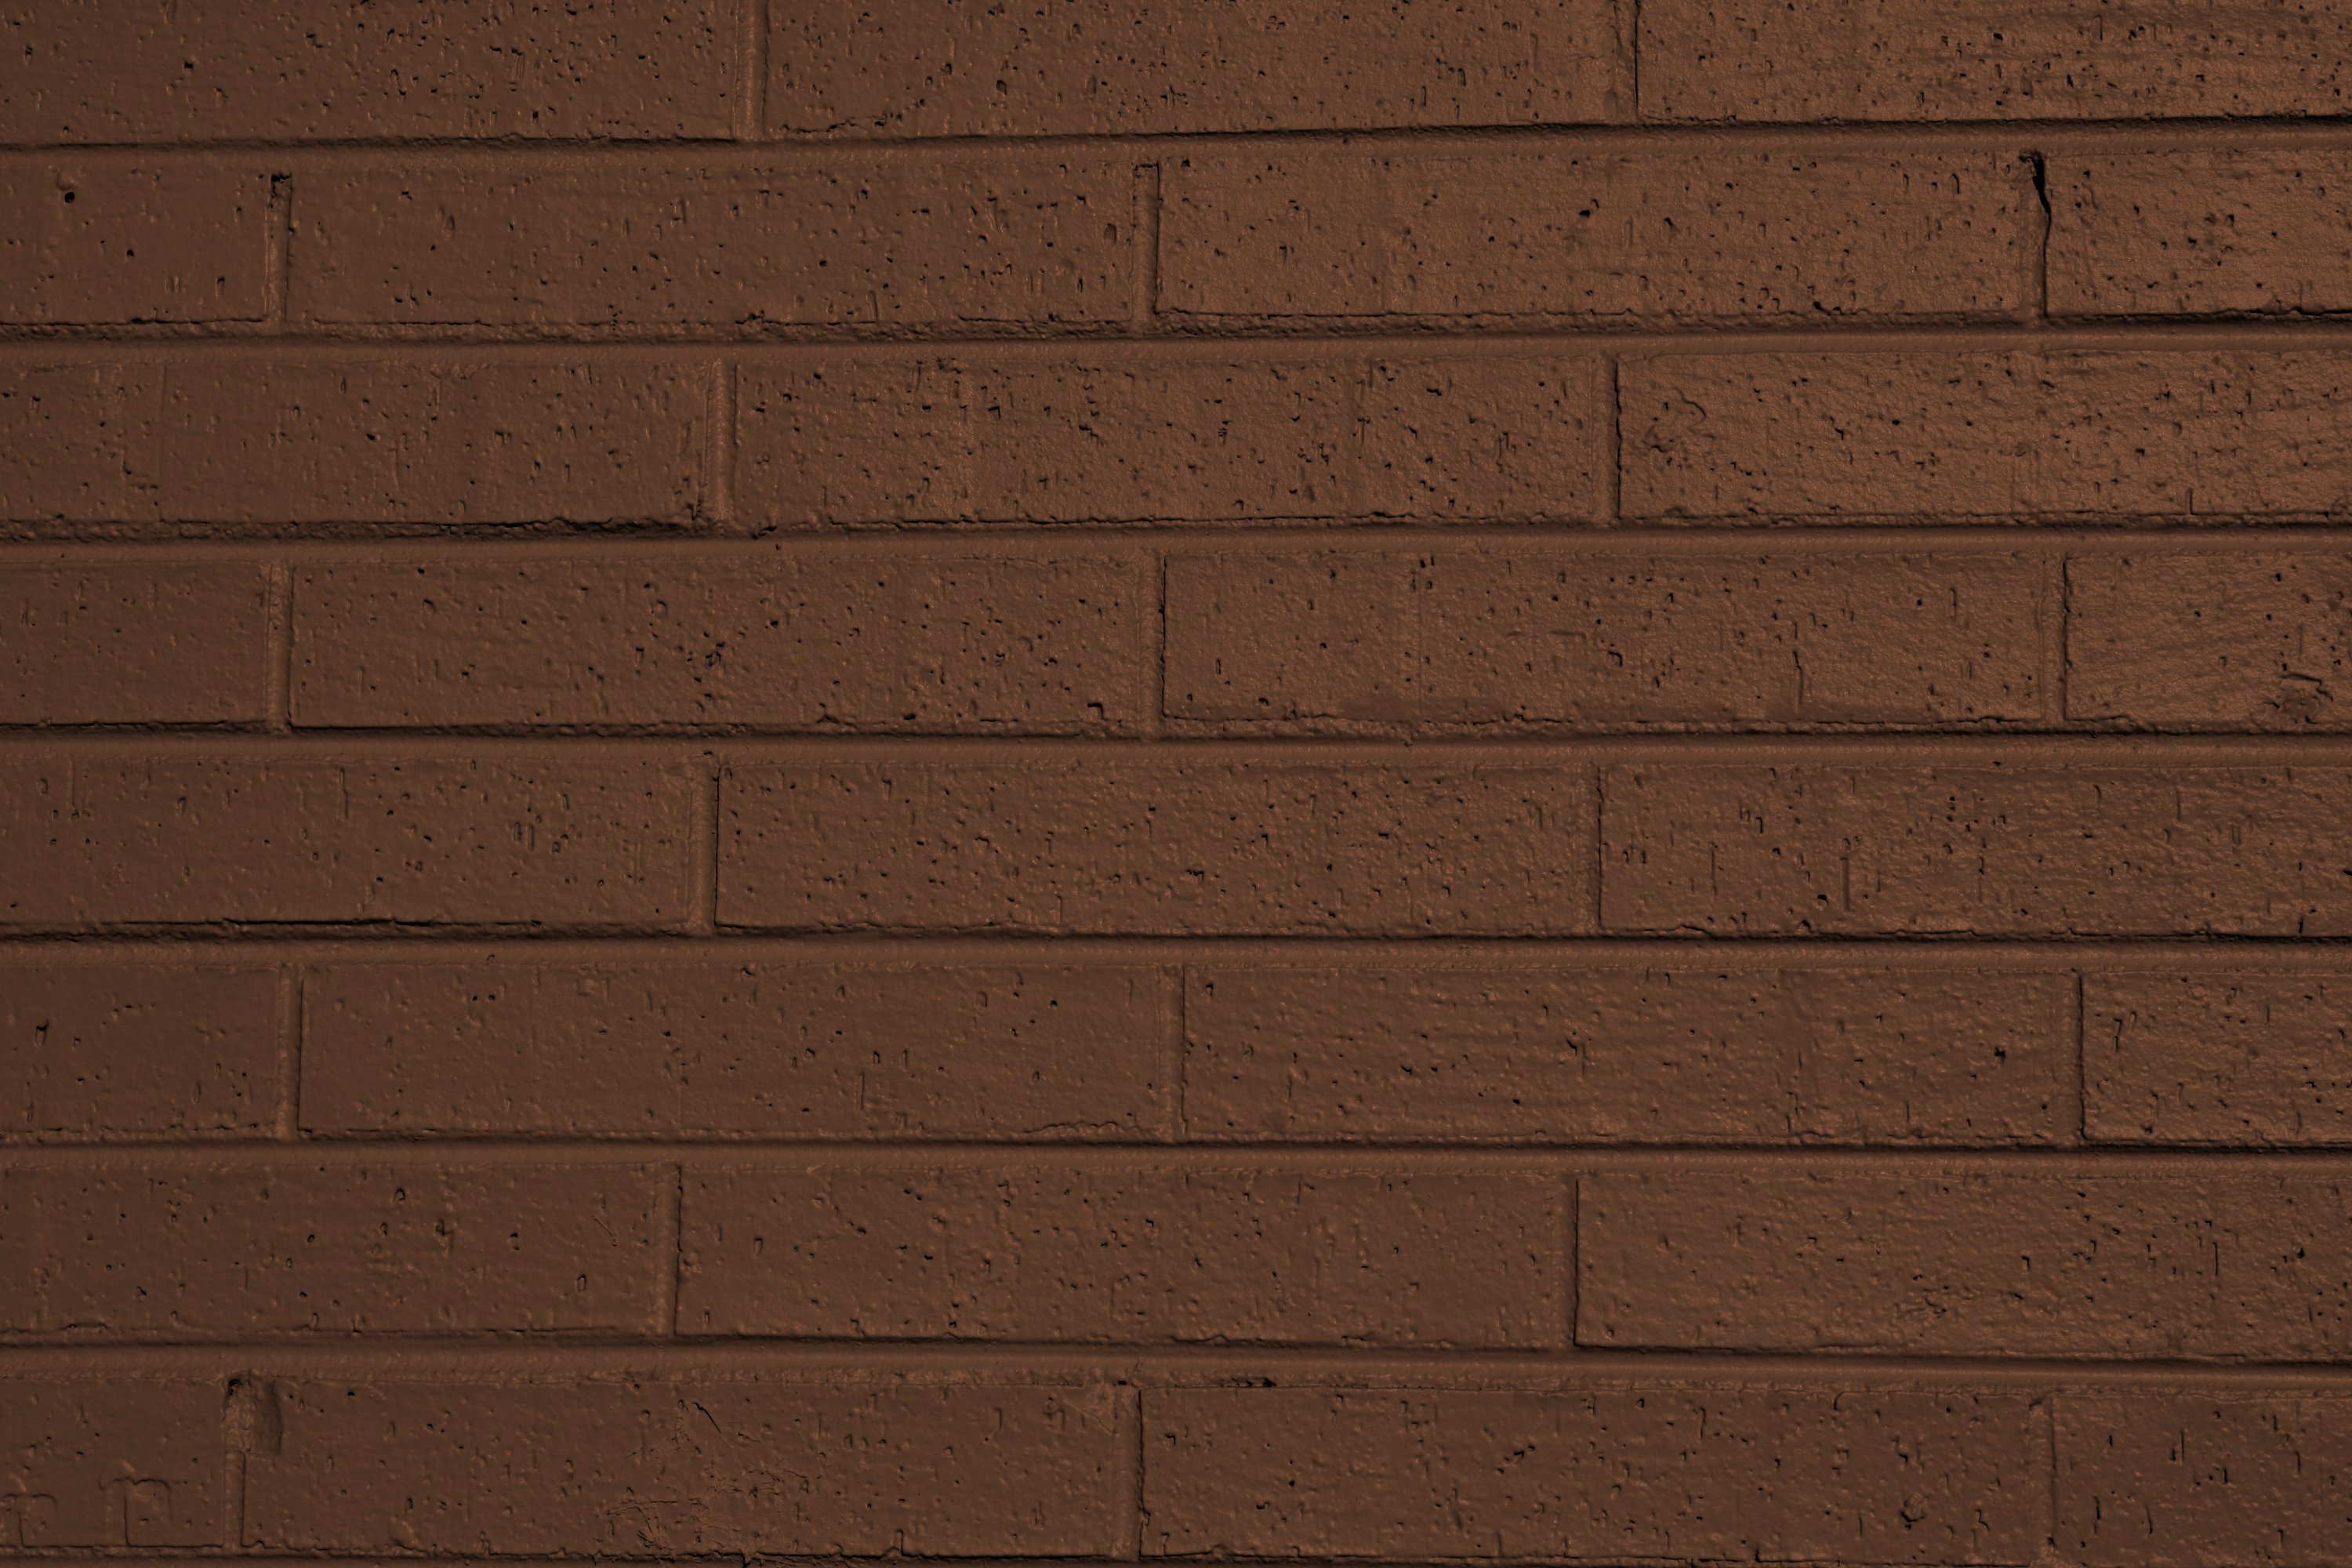 Brown Painted Brick Wall Texture Picture | Free Photograph | Photos ...